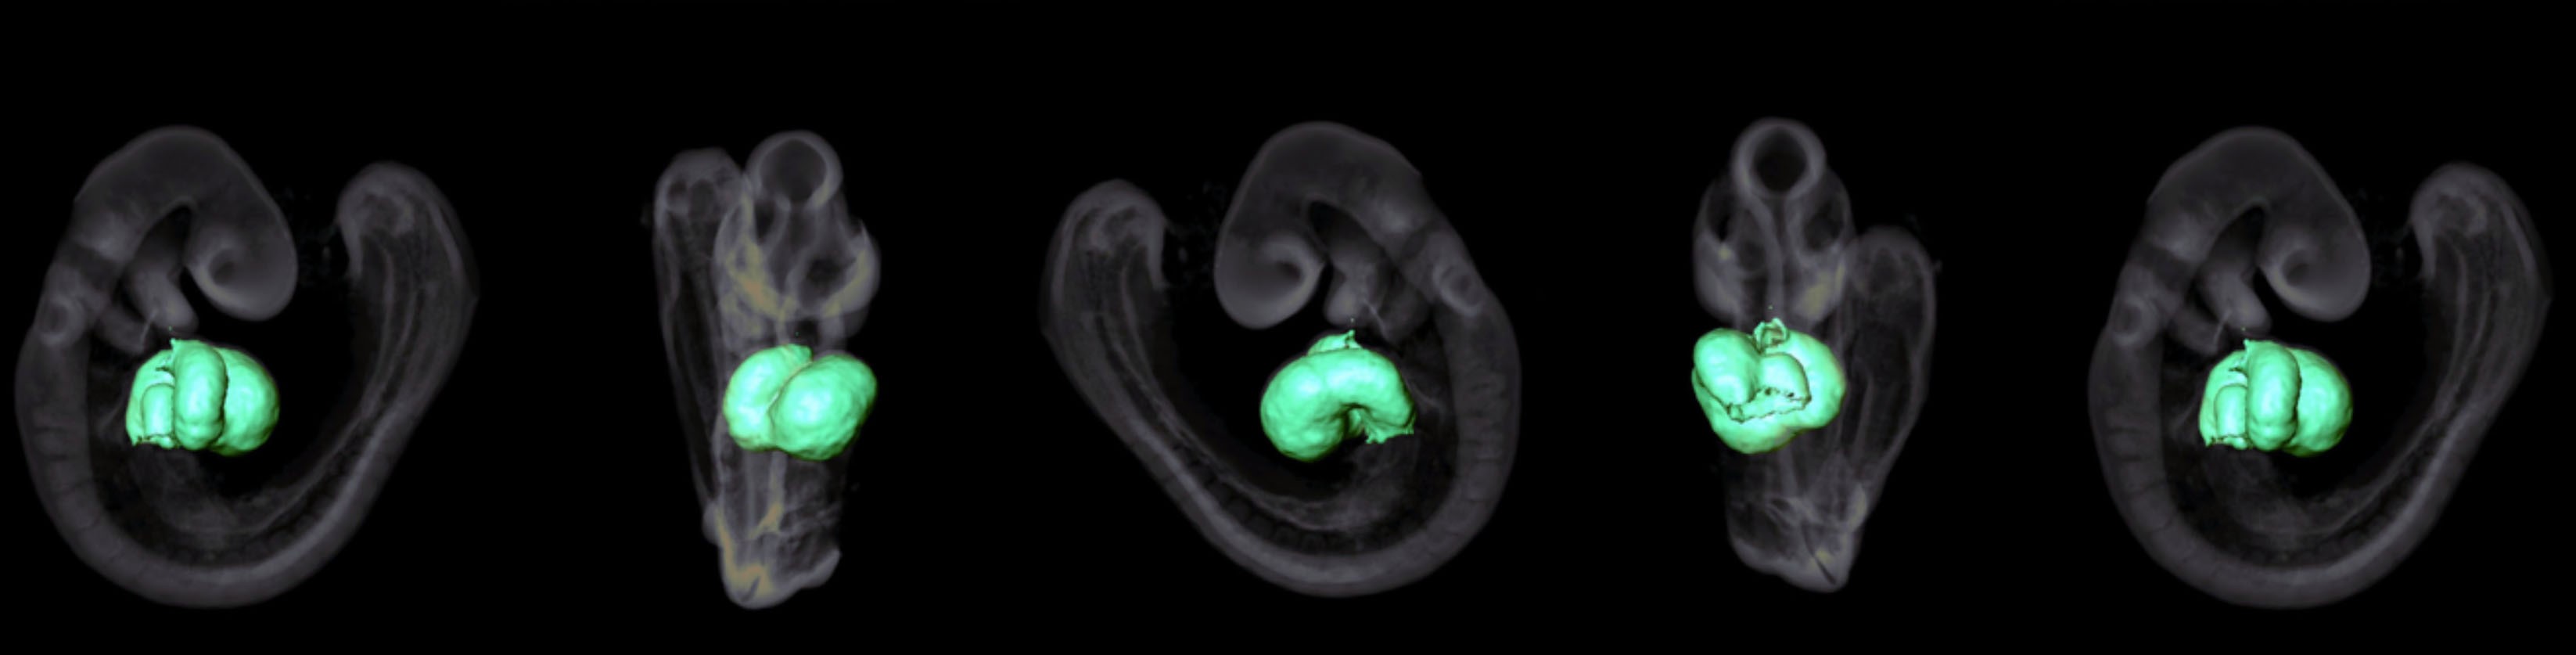 Heart development in a mouse embryo